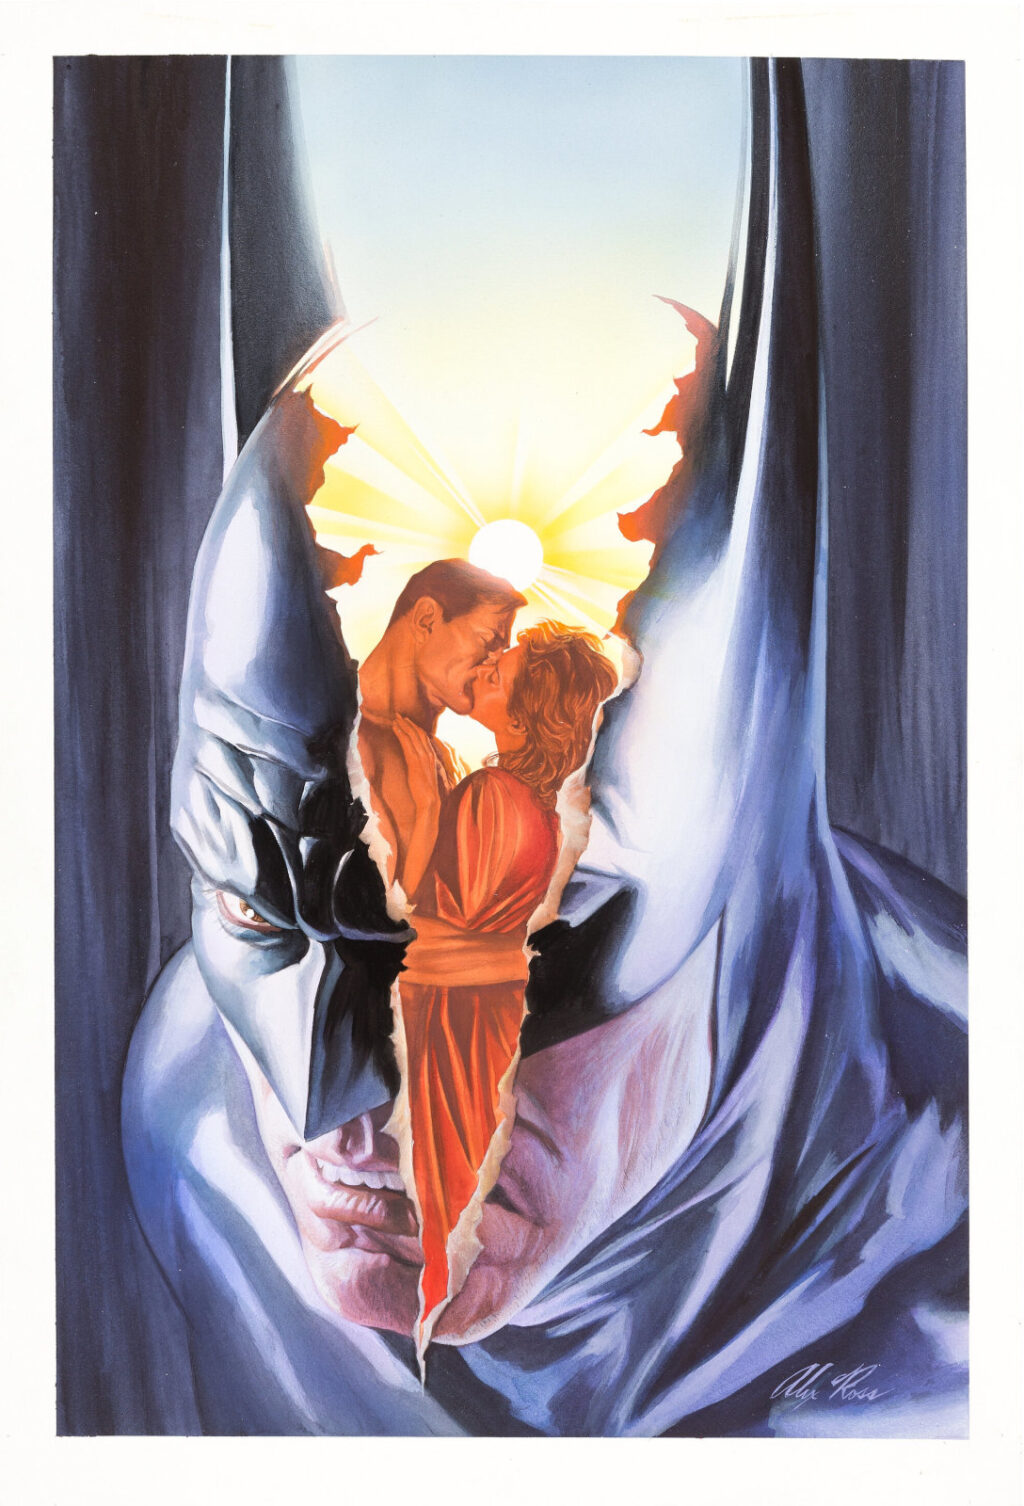 Batman issue 677 cover by Alex Ross